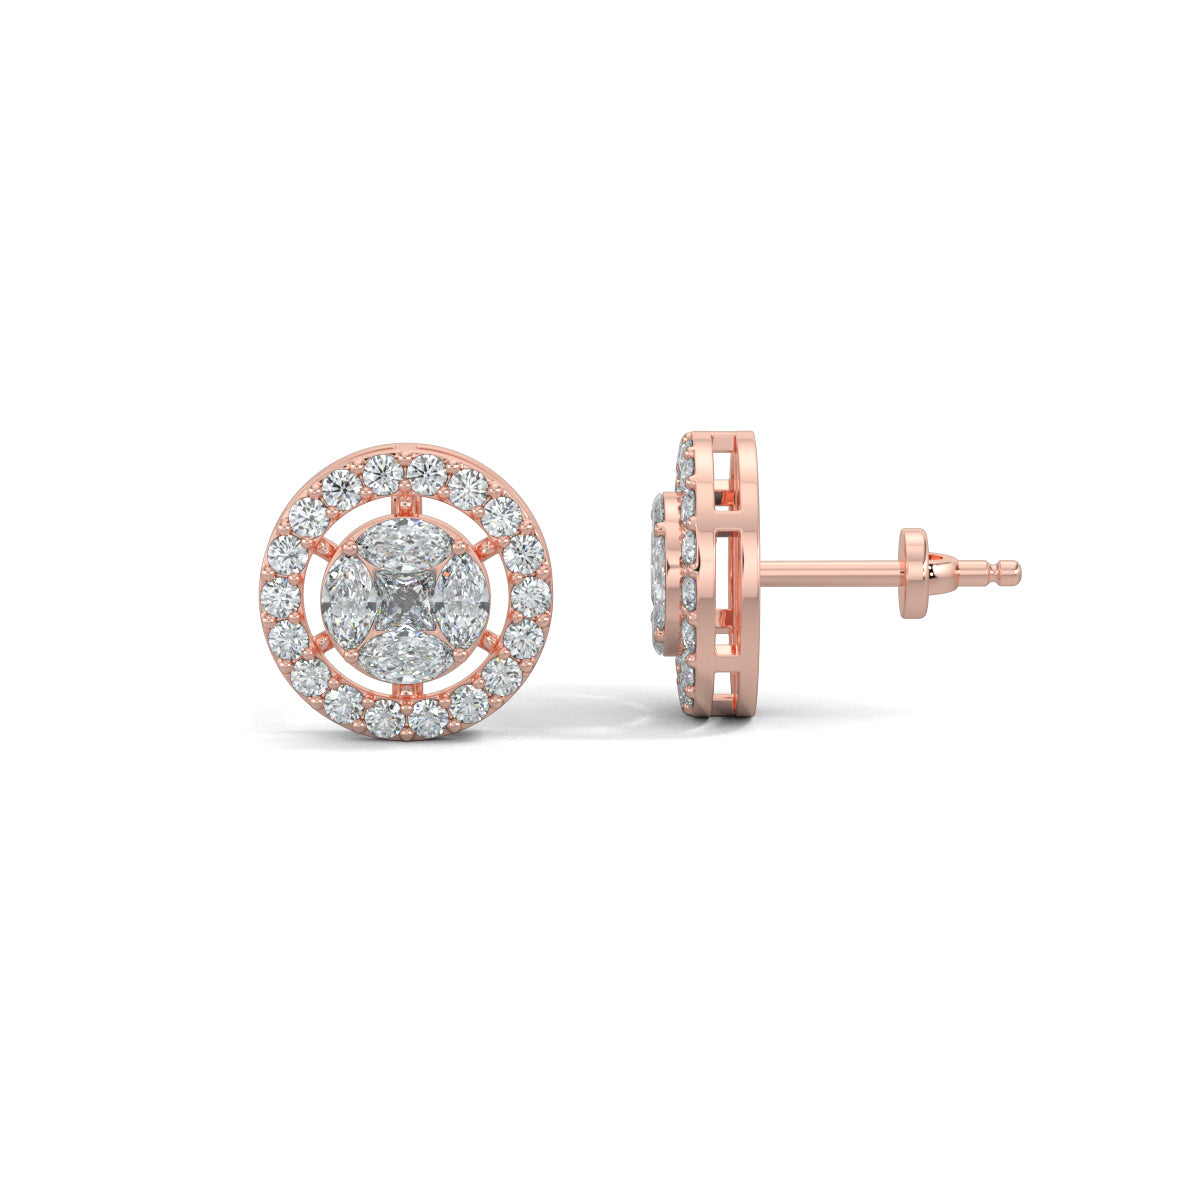 Rose Gold, Diamond Earrings, Cirque Crown Stud Earrings, Natural diamonds, Lab-grown diamond halo setting studs with round, princess cut, and marquise diamonds